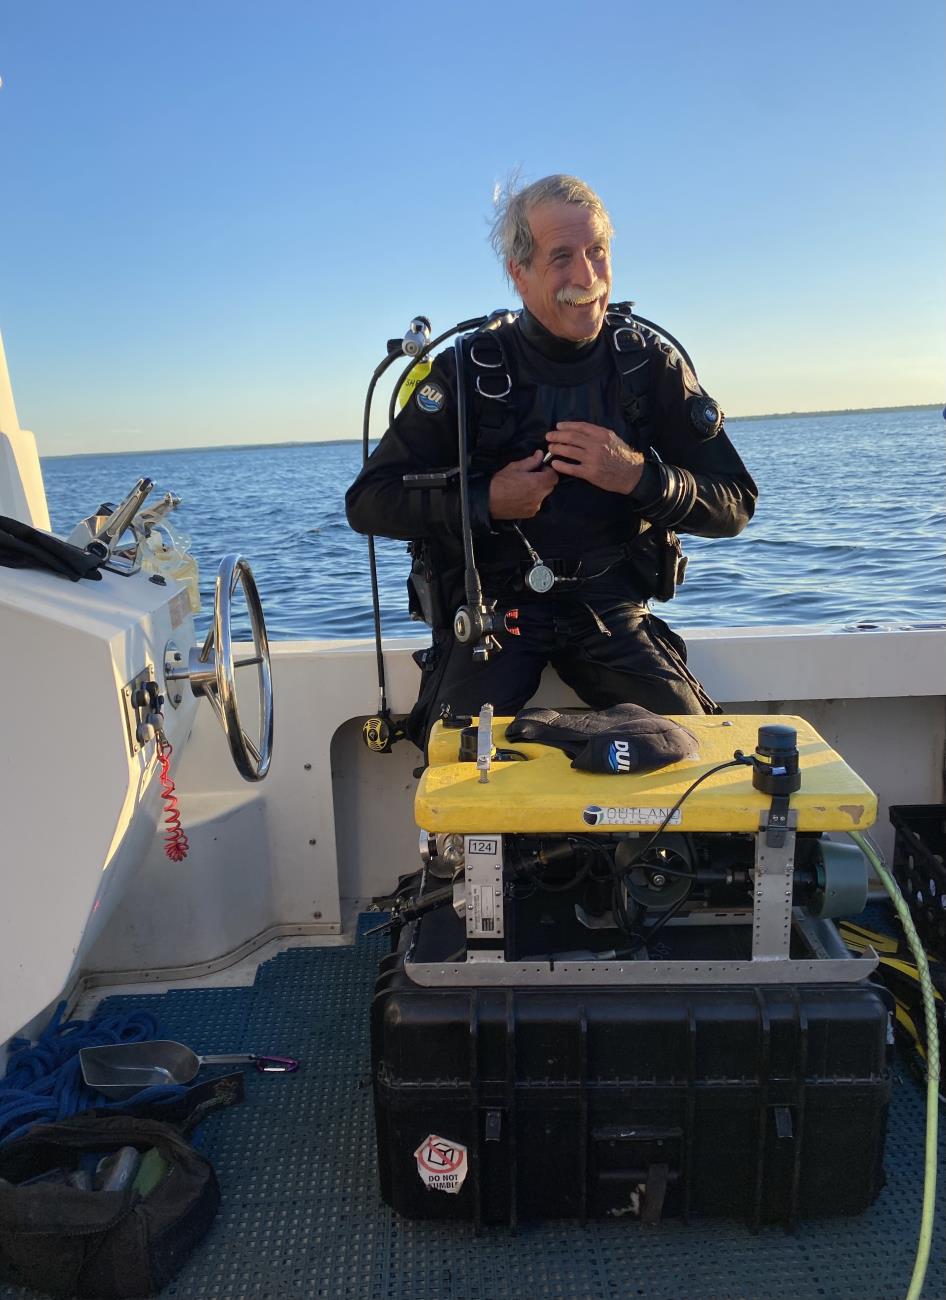 Dr. John O’Shea preparing to dive during archaeological investigations of the Alpena-Amberley Ridge in 2011. Photo courtesy of John O’Shea.